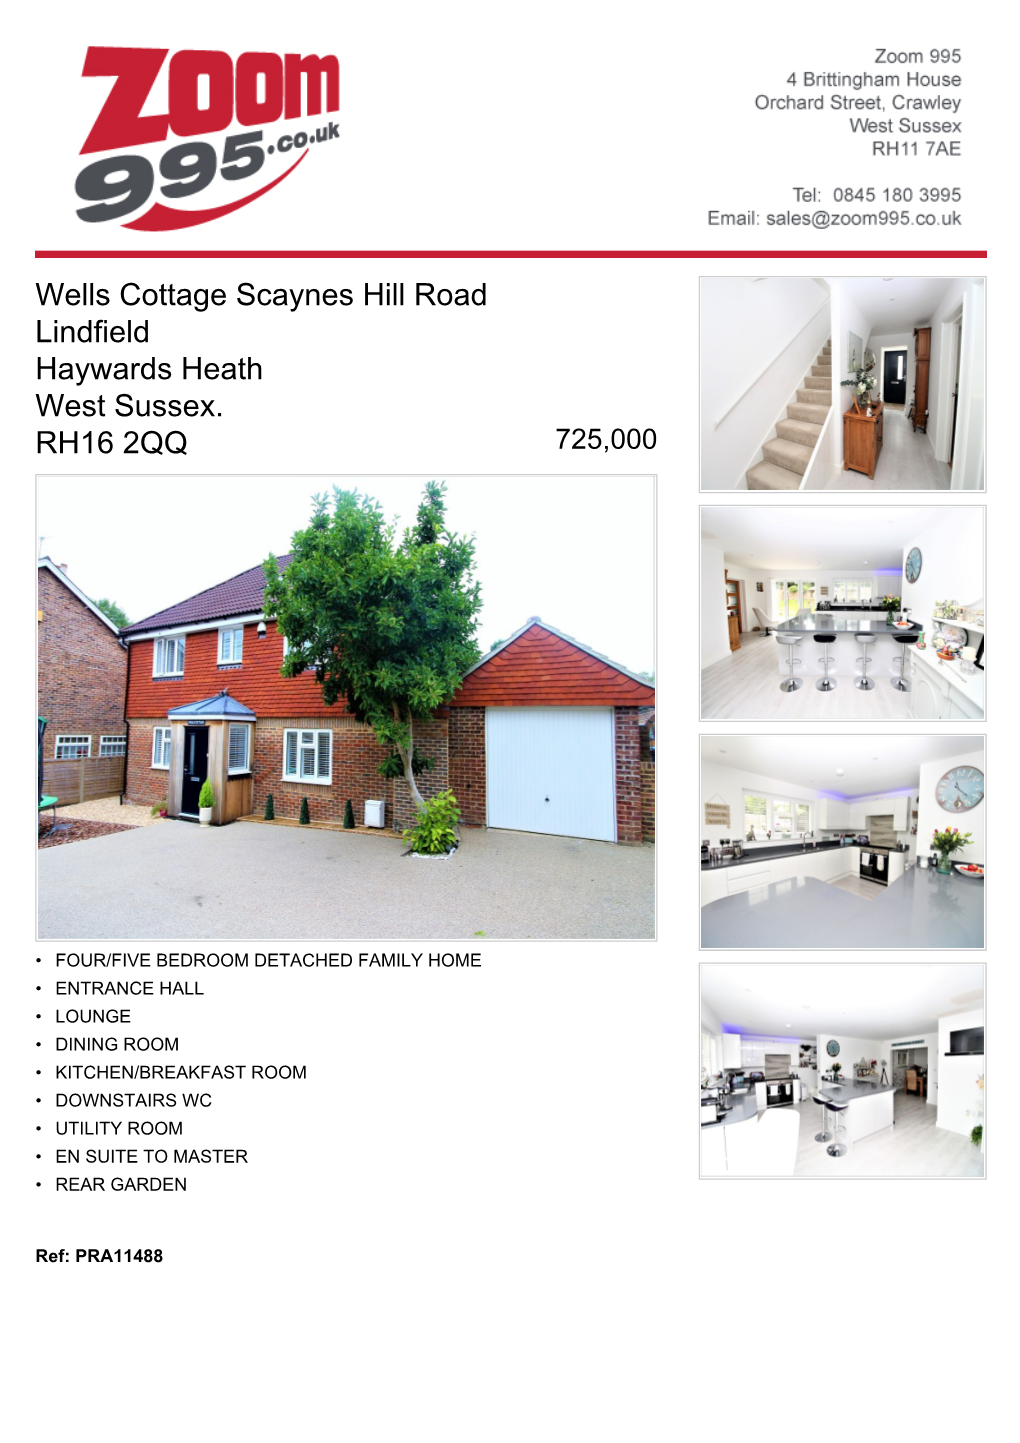 Wells Cottage Scaynes Hill Road Lindfield Haywards Heath West Sussex